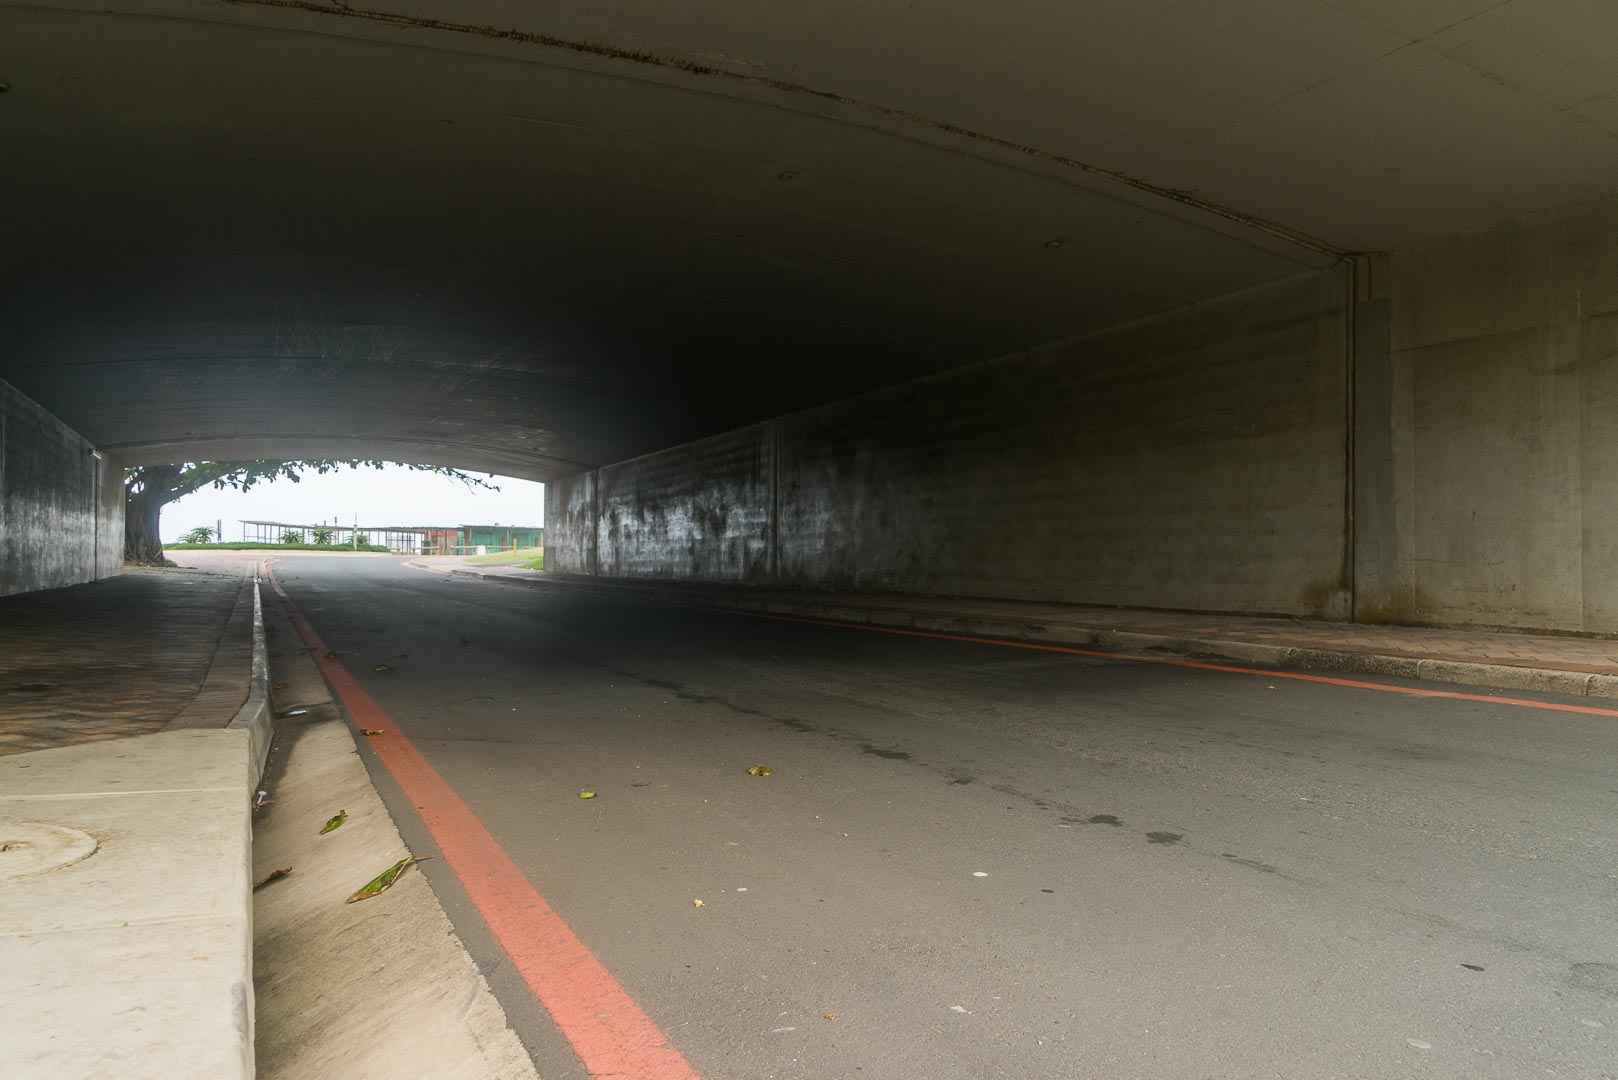 Backplate • ID: 10123 • HDRI Haven - Road Underpass